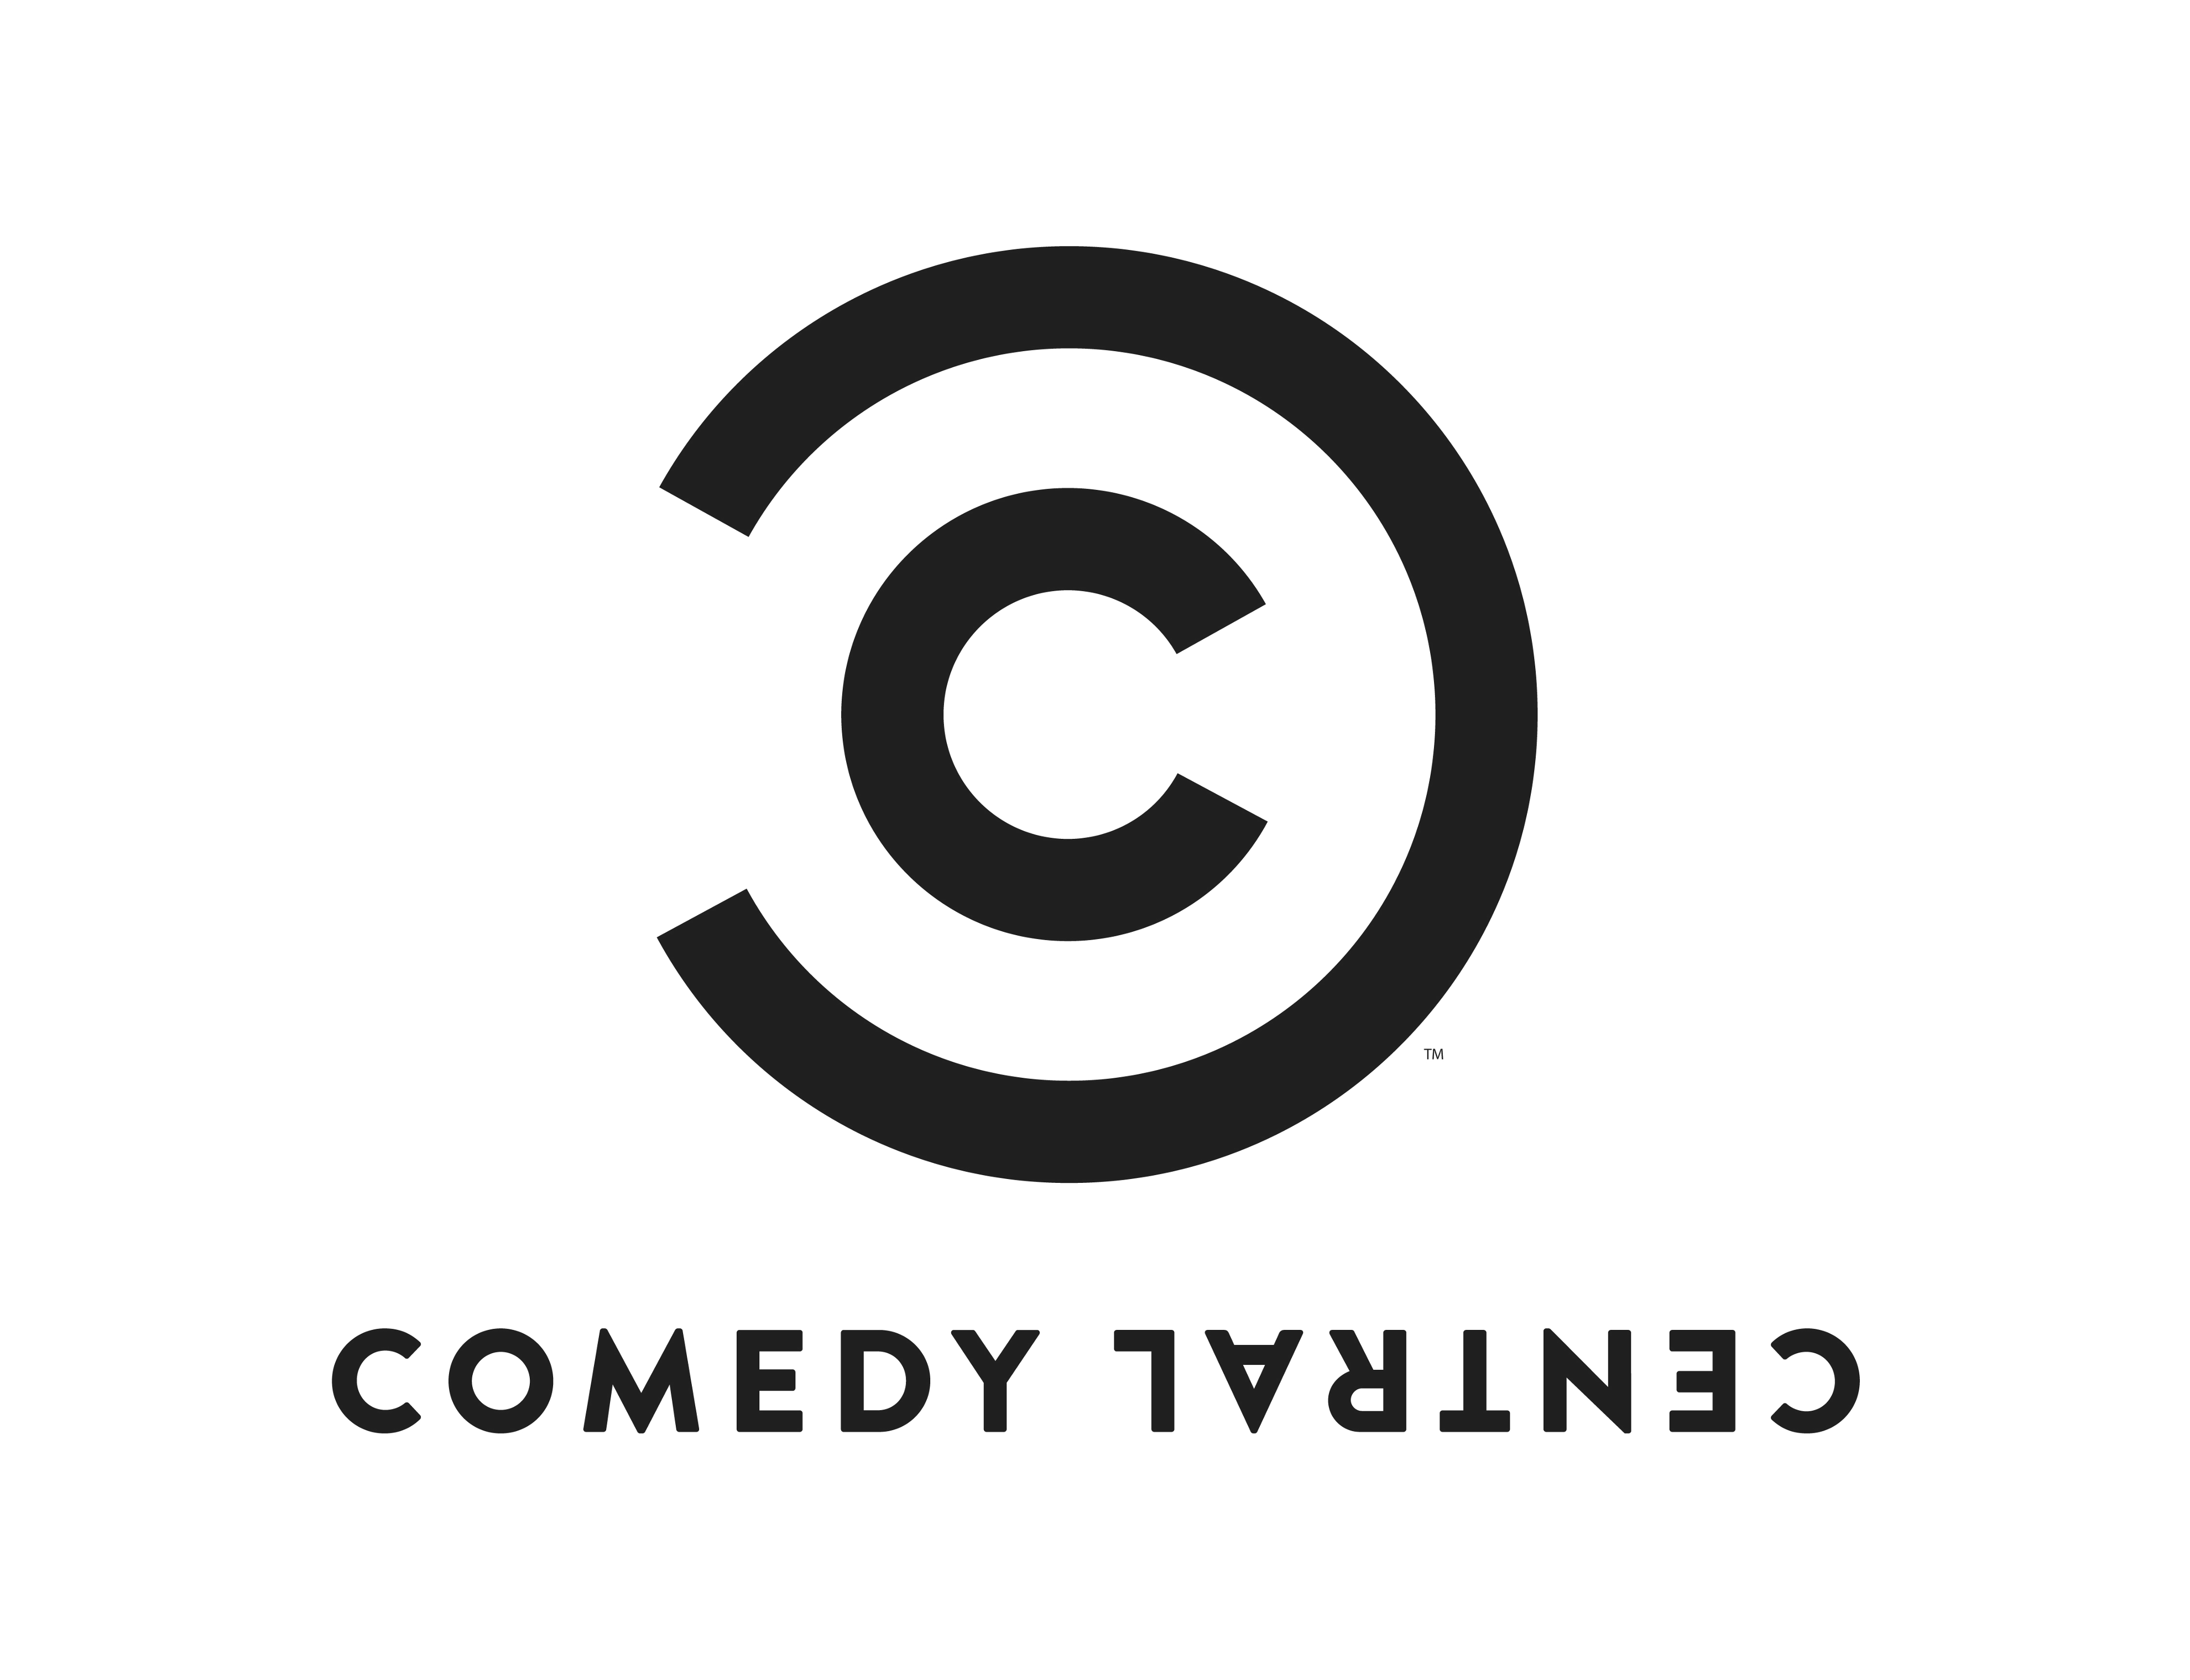 Comedy Central Logo - File:Comedy Central Logo 2011 vertikal.png - Wikimedia Commons